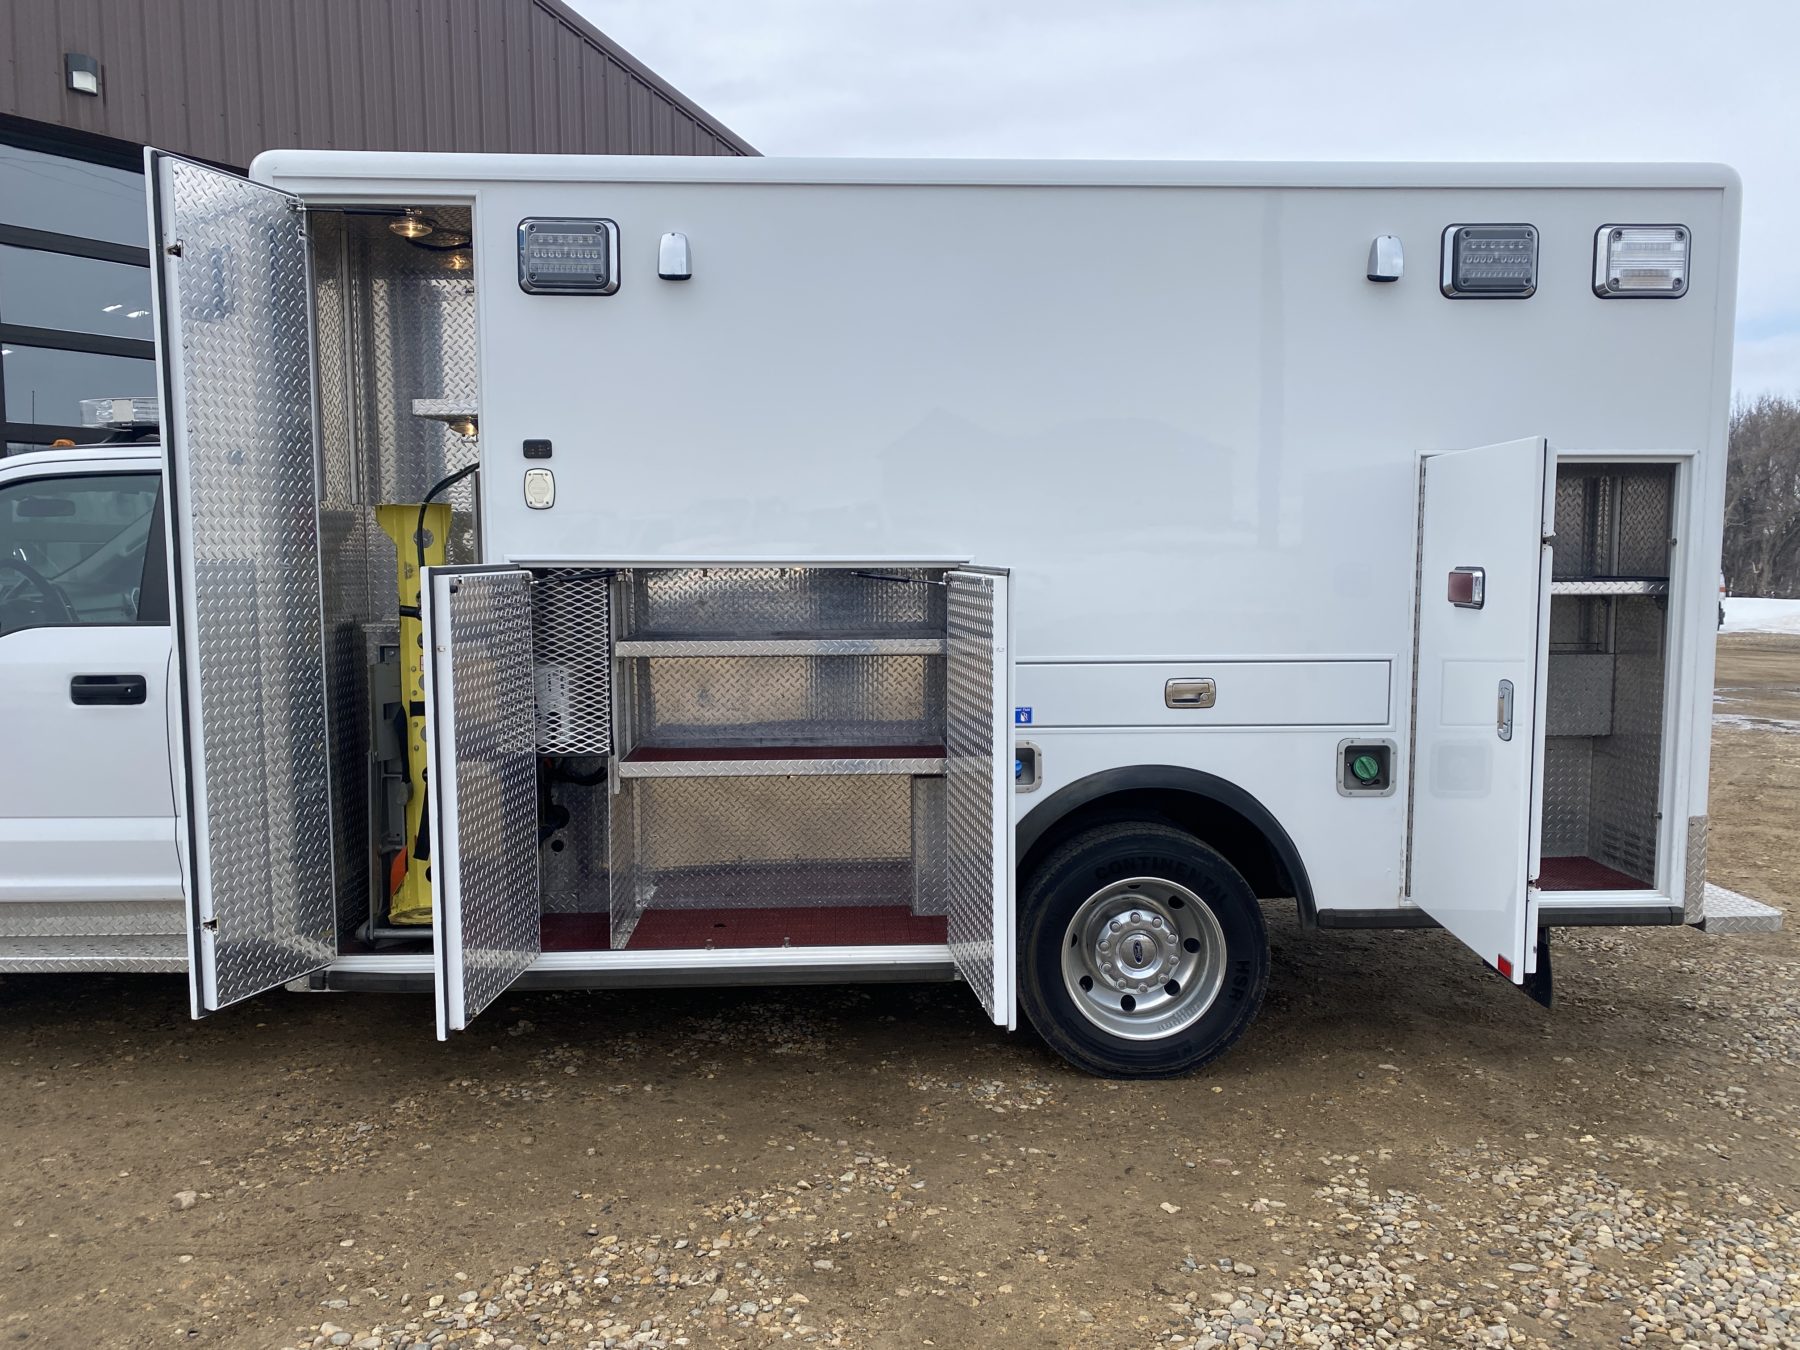 2019 Ford F450 4x4 Heavy Duty Ambulance For Sale – Picture 6